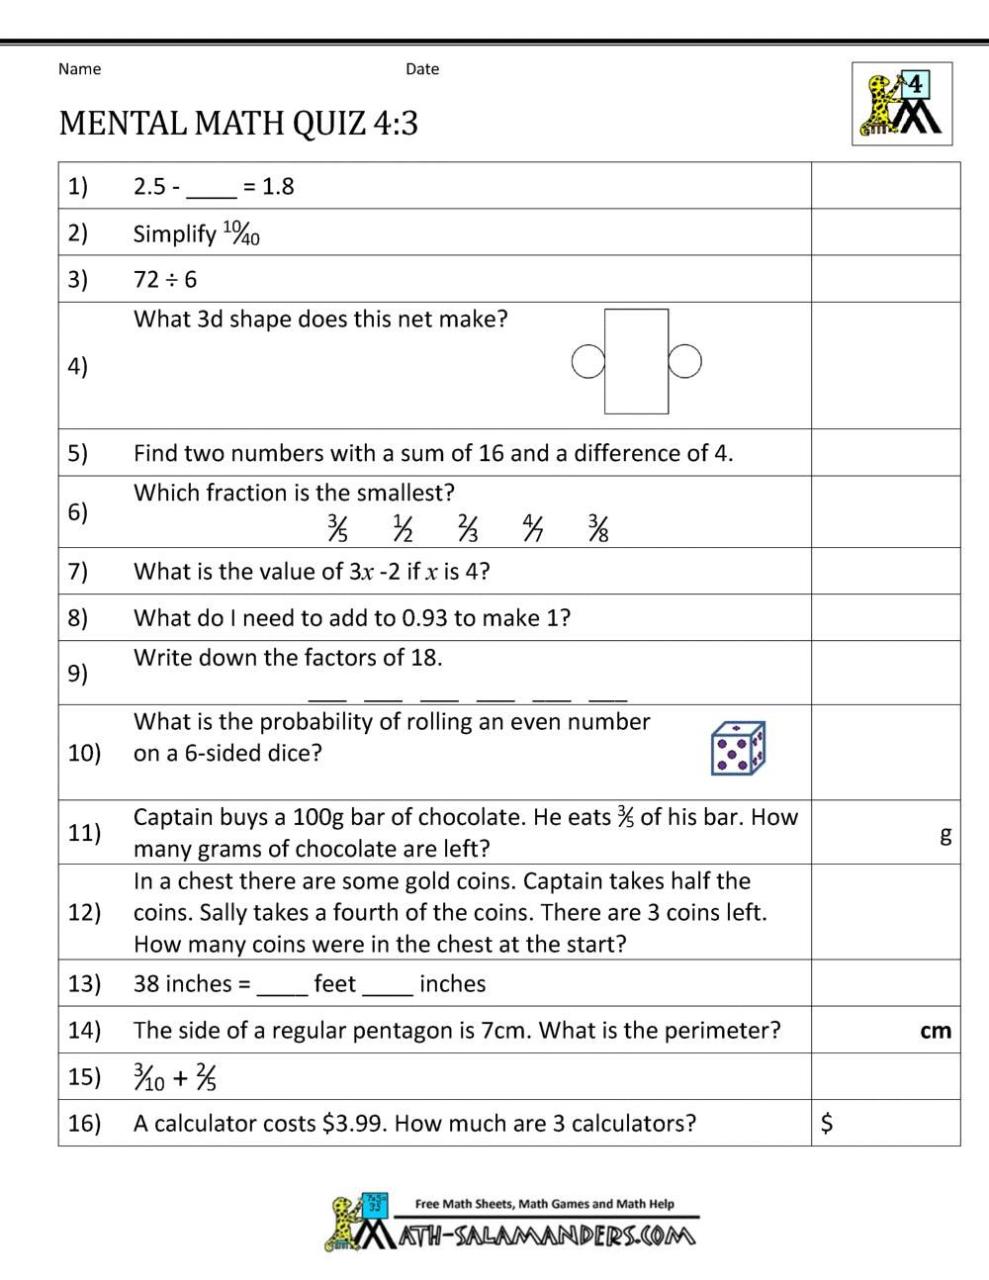 Math Worksheets Pdf 4th Grade How do I do an image search on my Android?